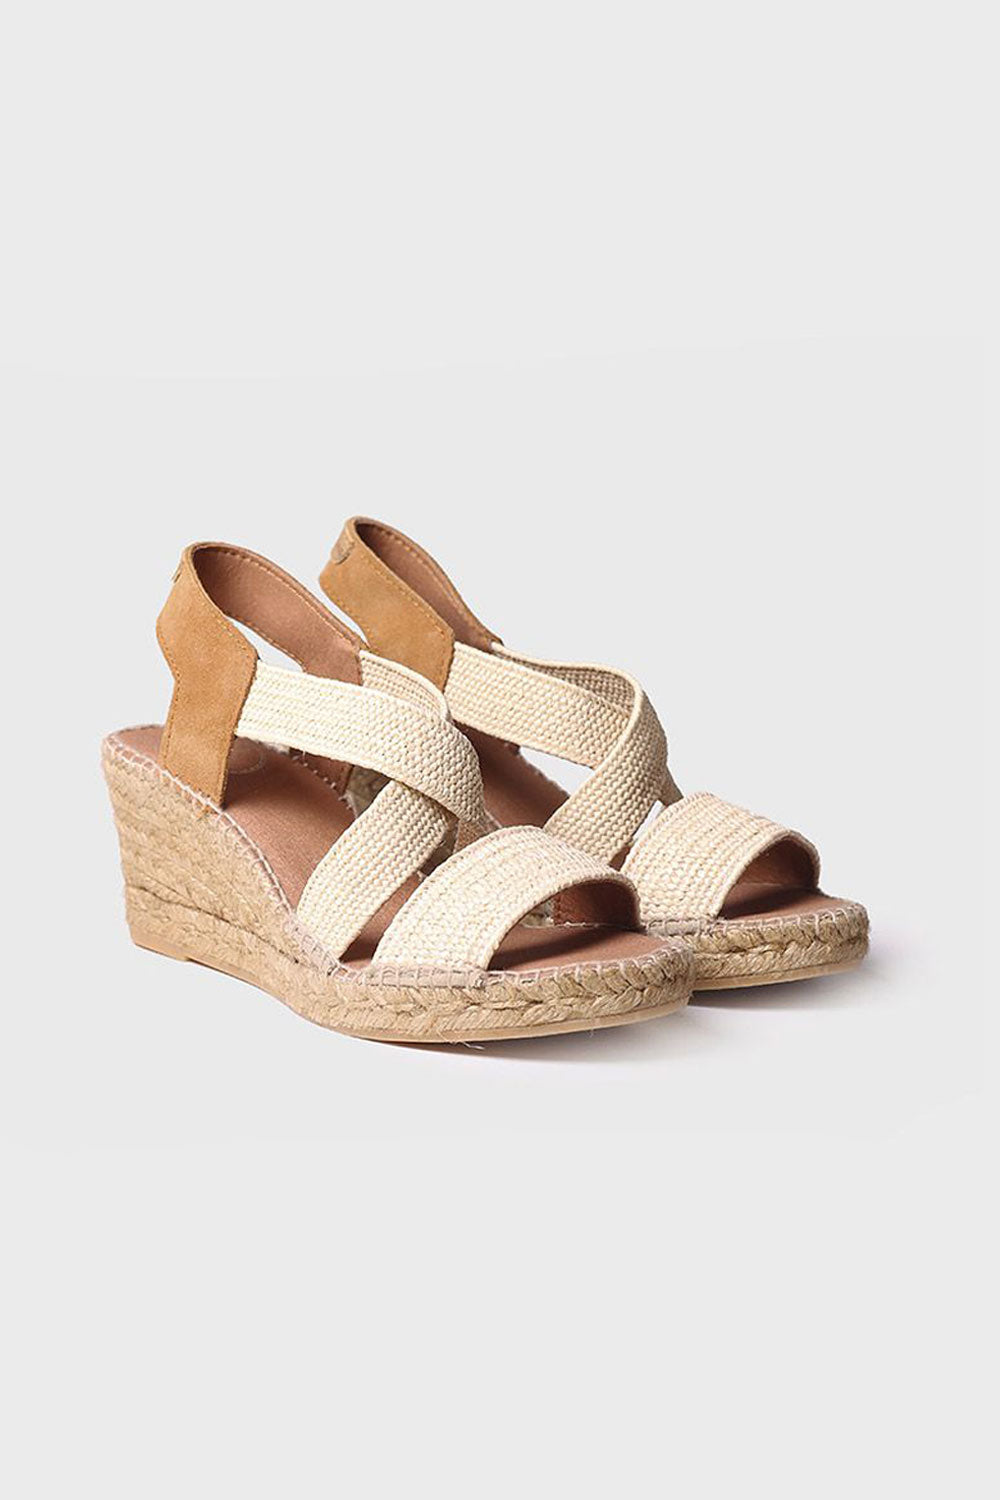 "Susa SP Natural" Wedge espadrille in fabric with elastic bands